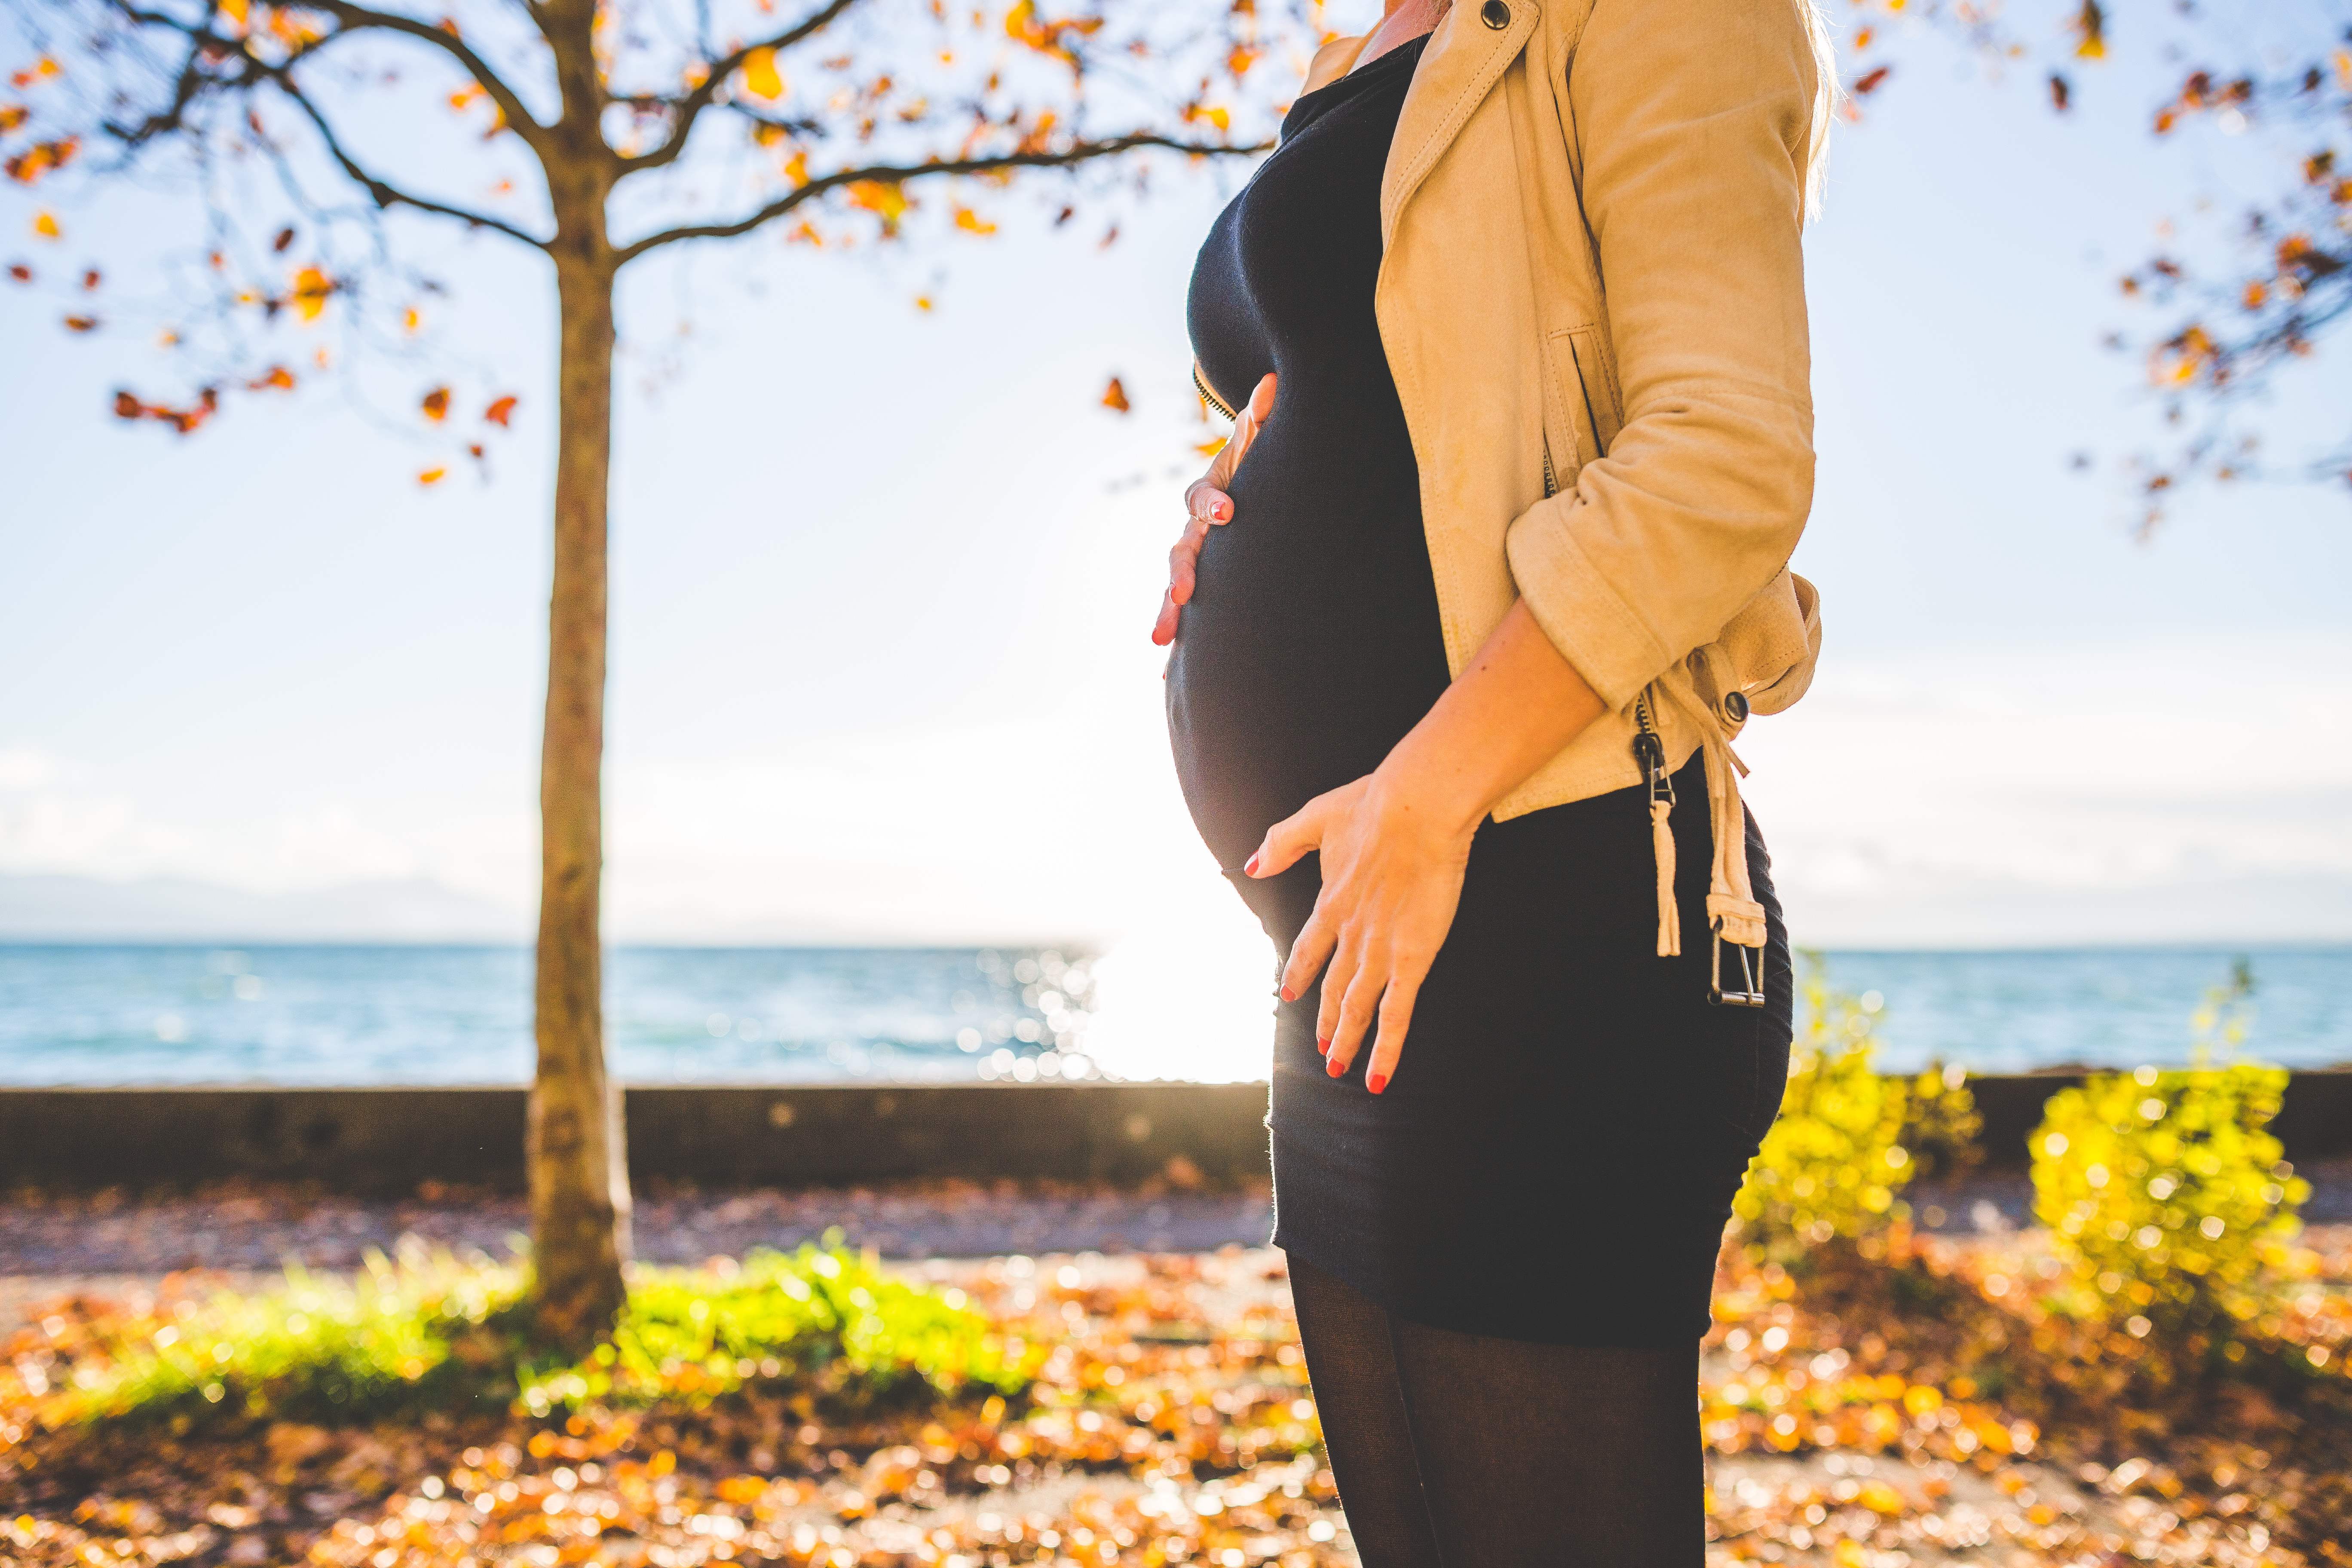 With a baby on board, pregnant women may find it more difficult to maintain balance and be surefooted.